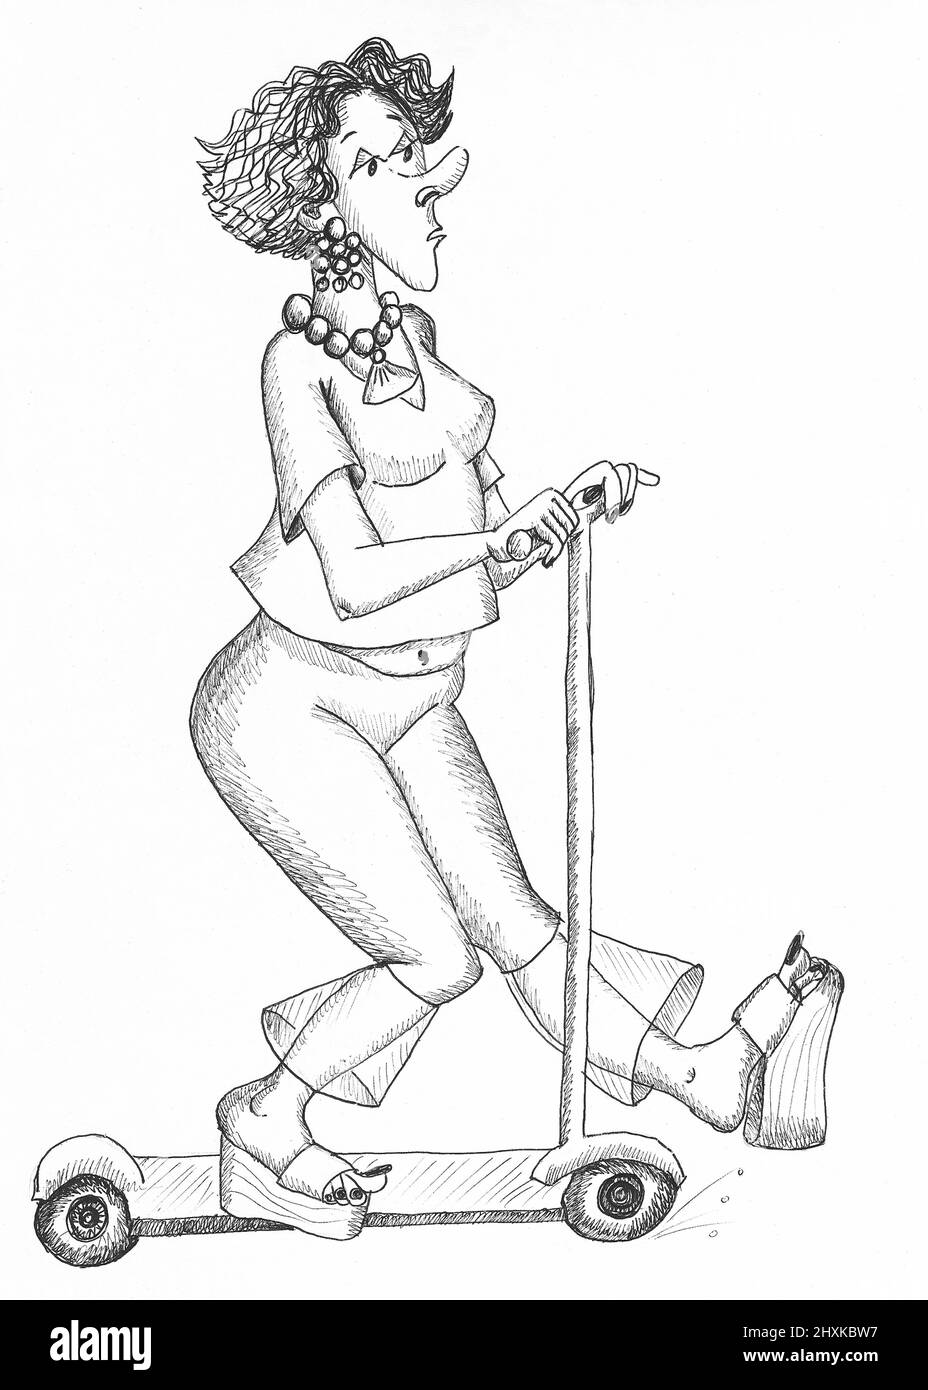 Woman riding a scooter. Illustration. Stock Photo